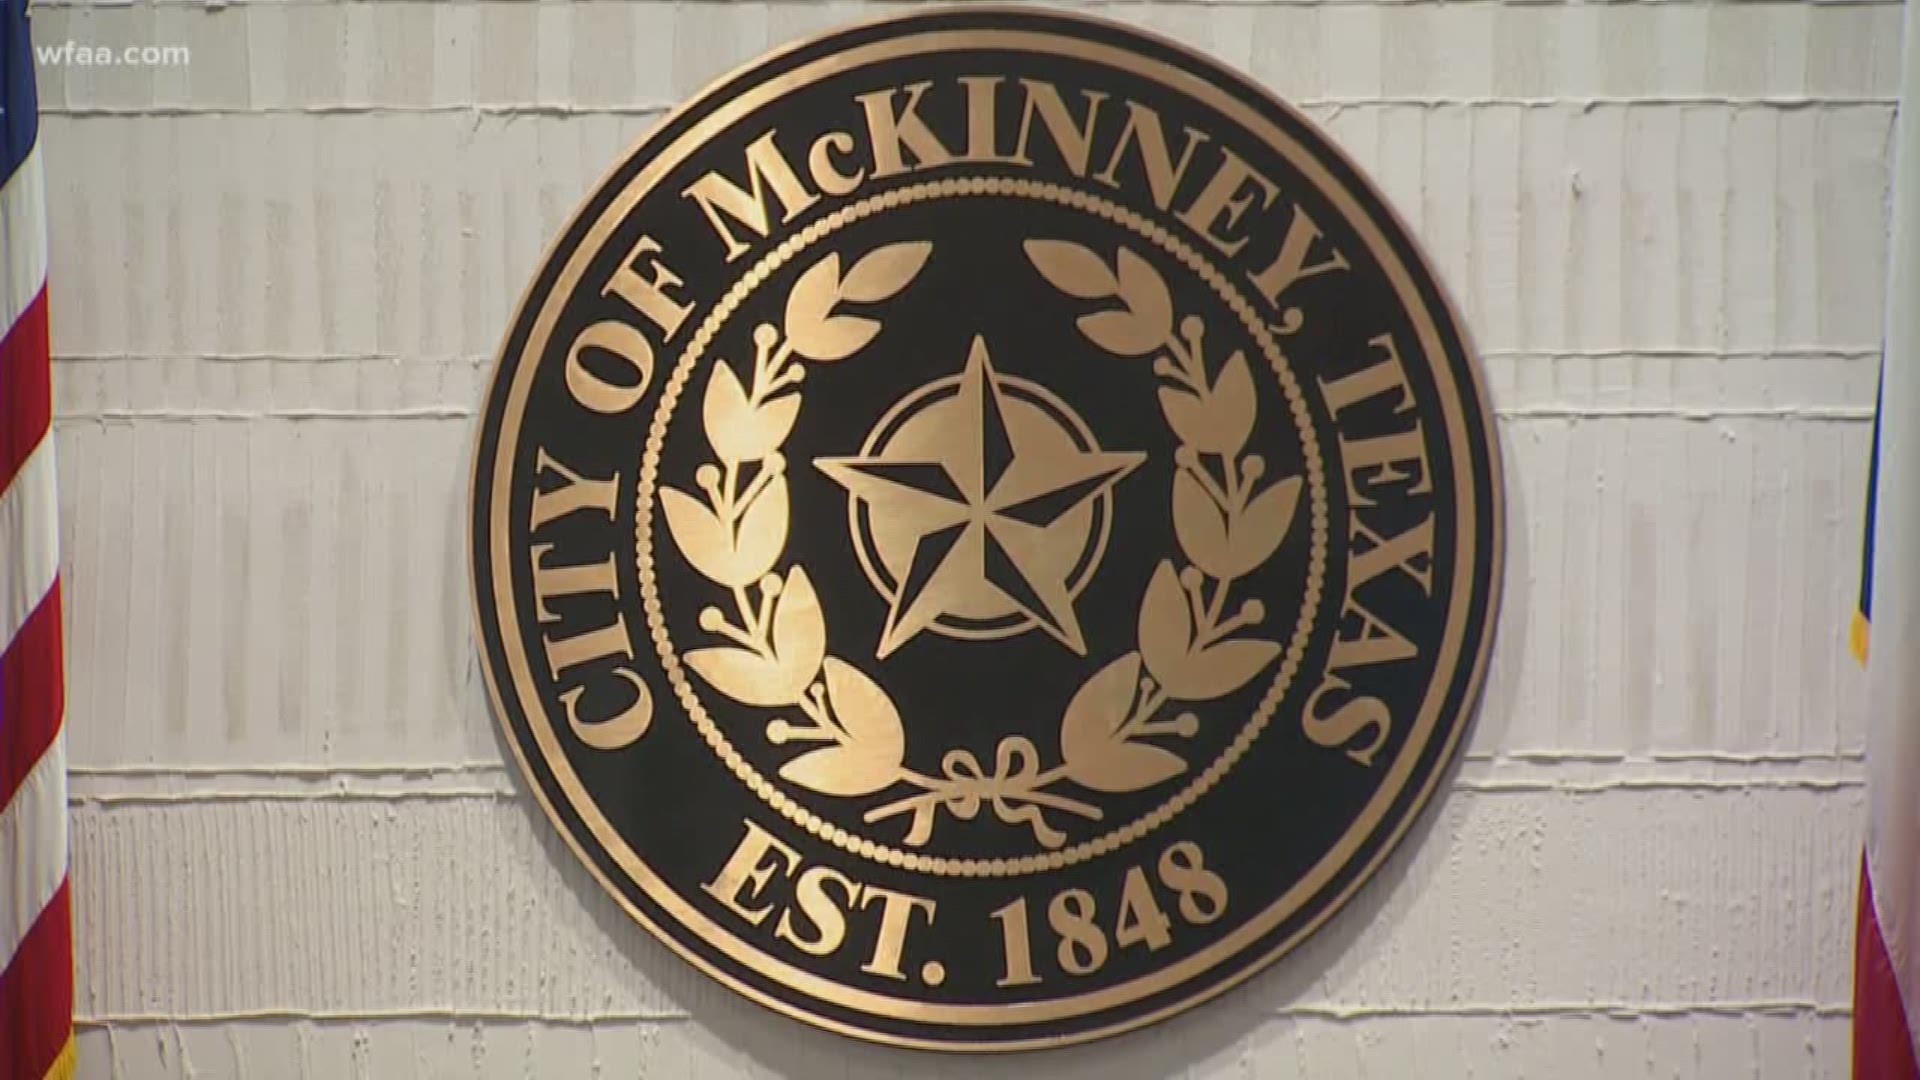 A huge crowd showed up at Tuesday night's City Council meeting in McKinney. This comes after a coucil member declared a "Black State of Emergency."